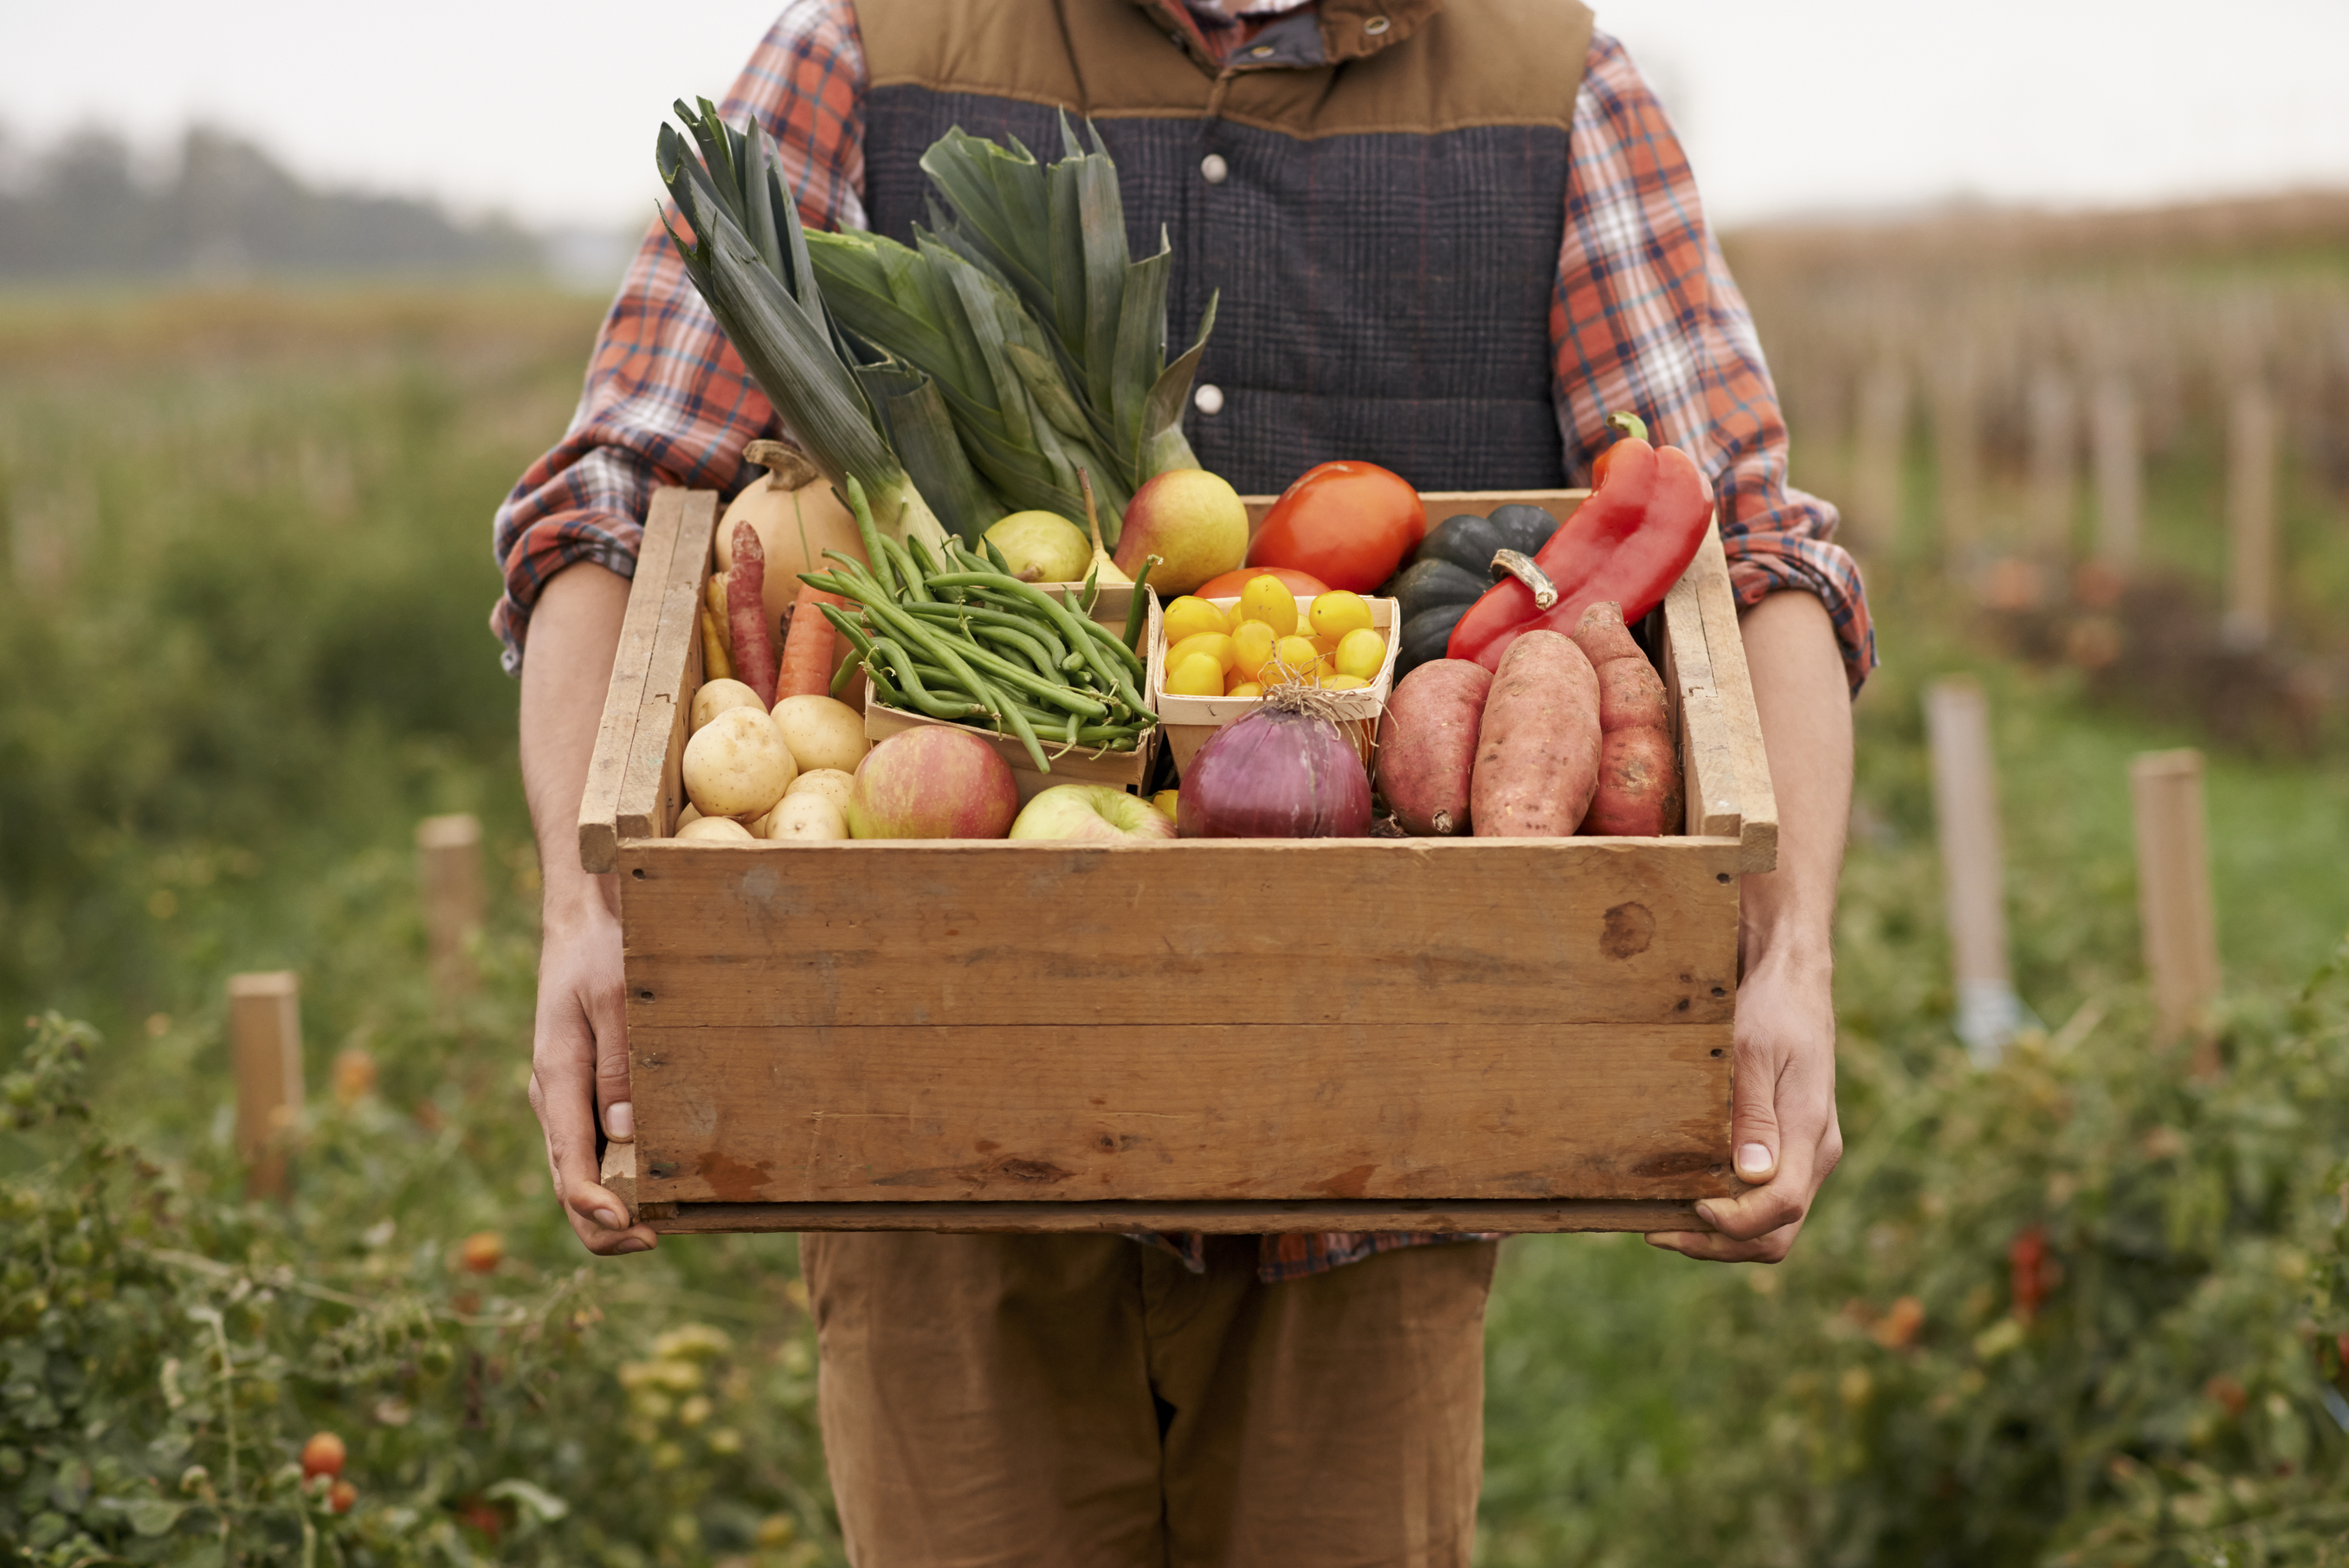 Cropped shot of a farmer carrying a crate full of fresh producehttp://195.154.178.81/DATA/i_collage/pu/shoots/806061.jpg